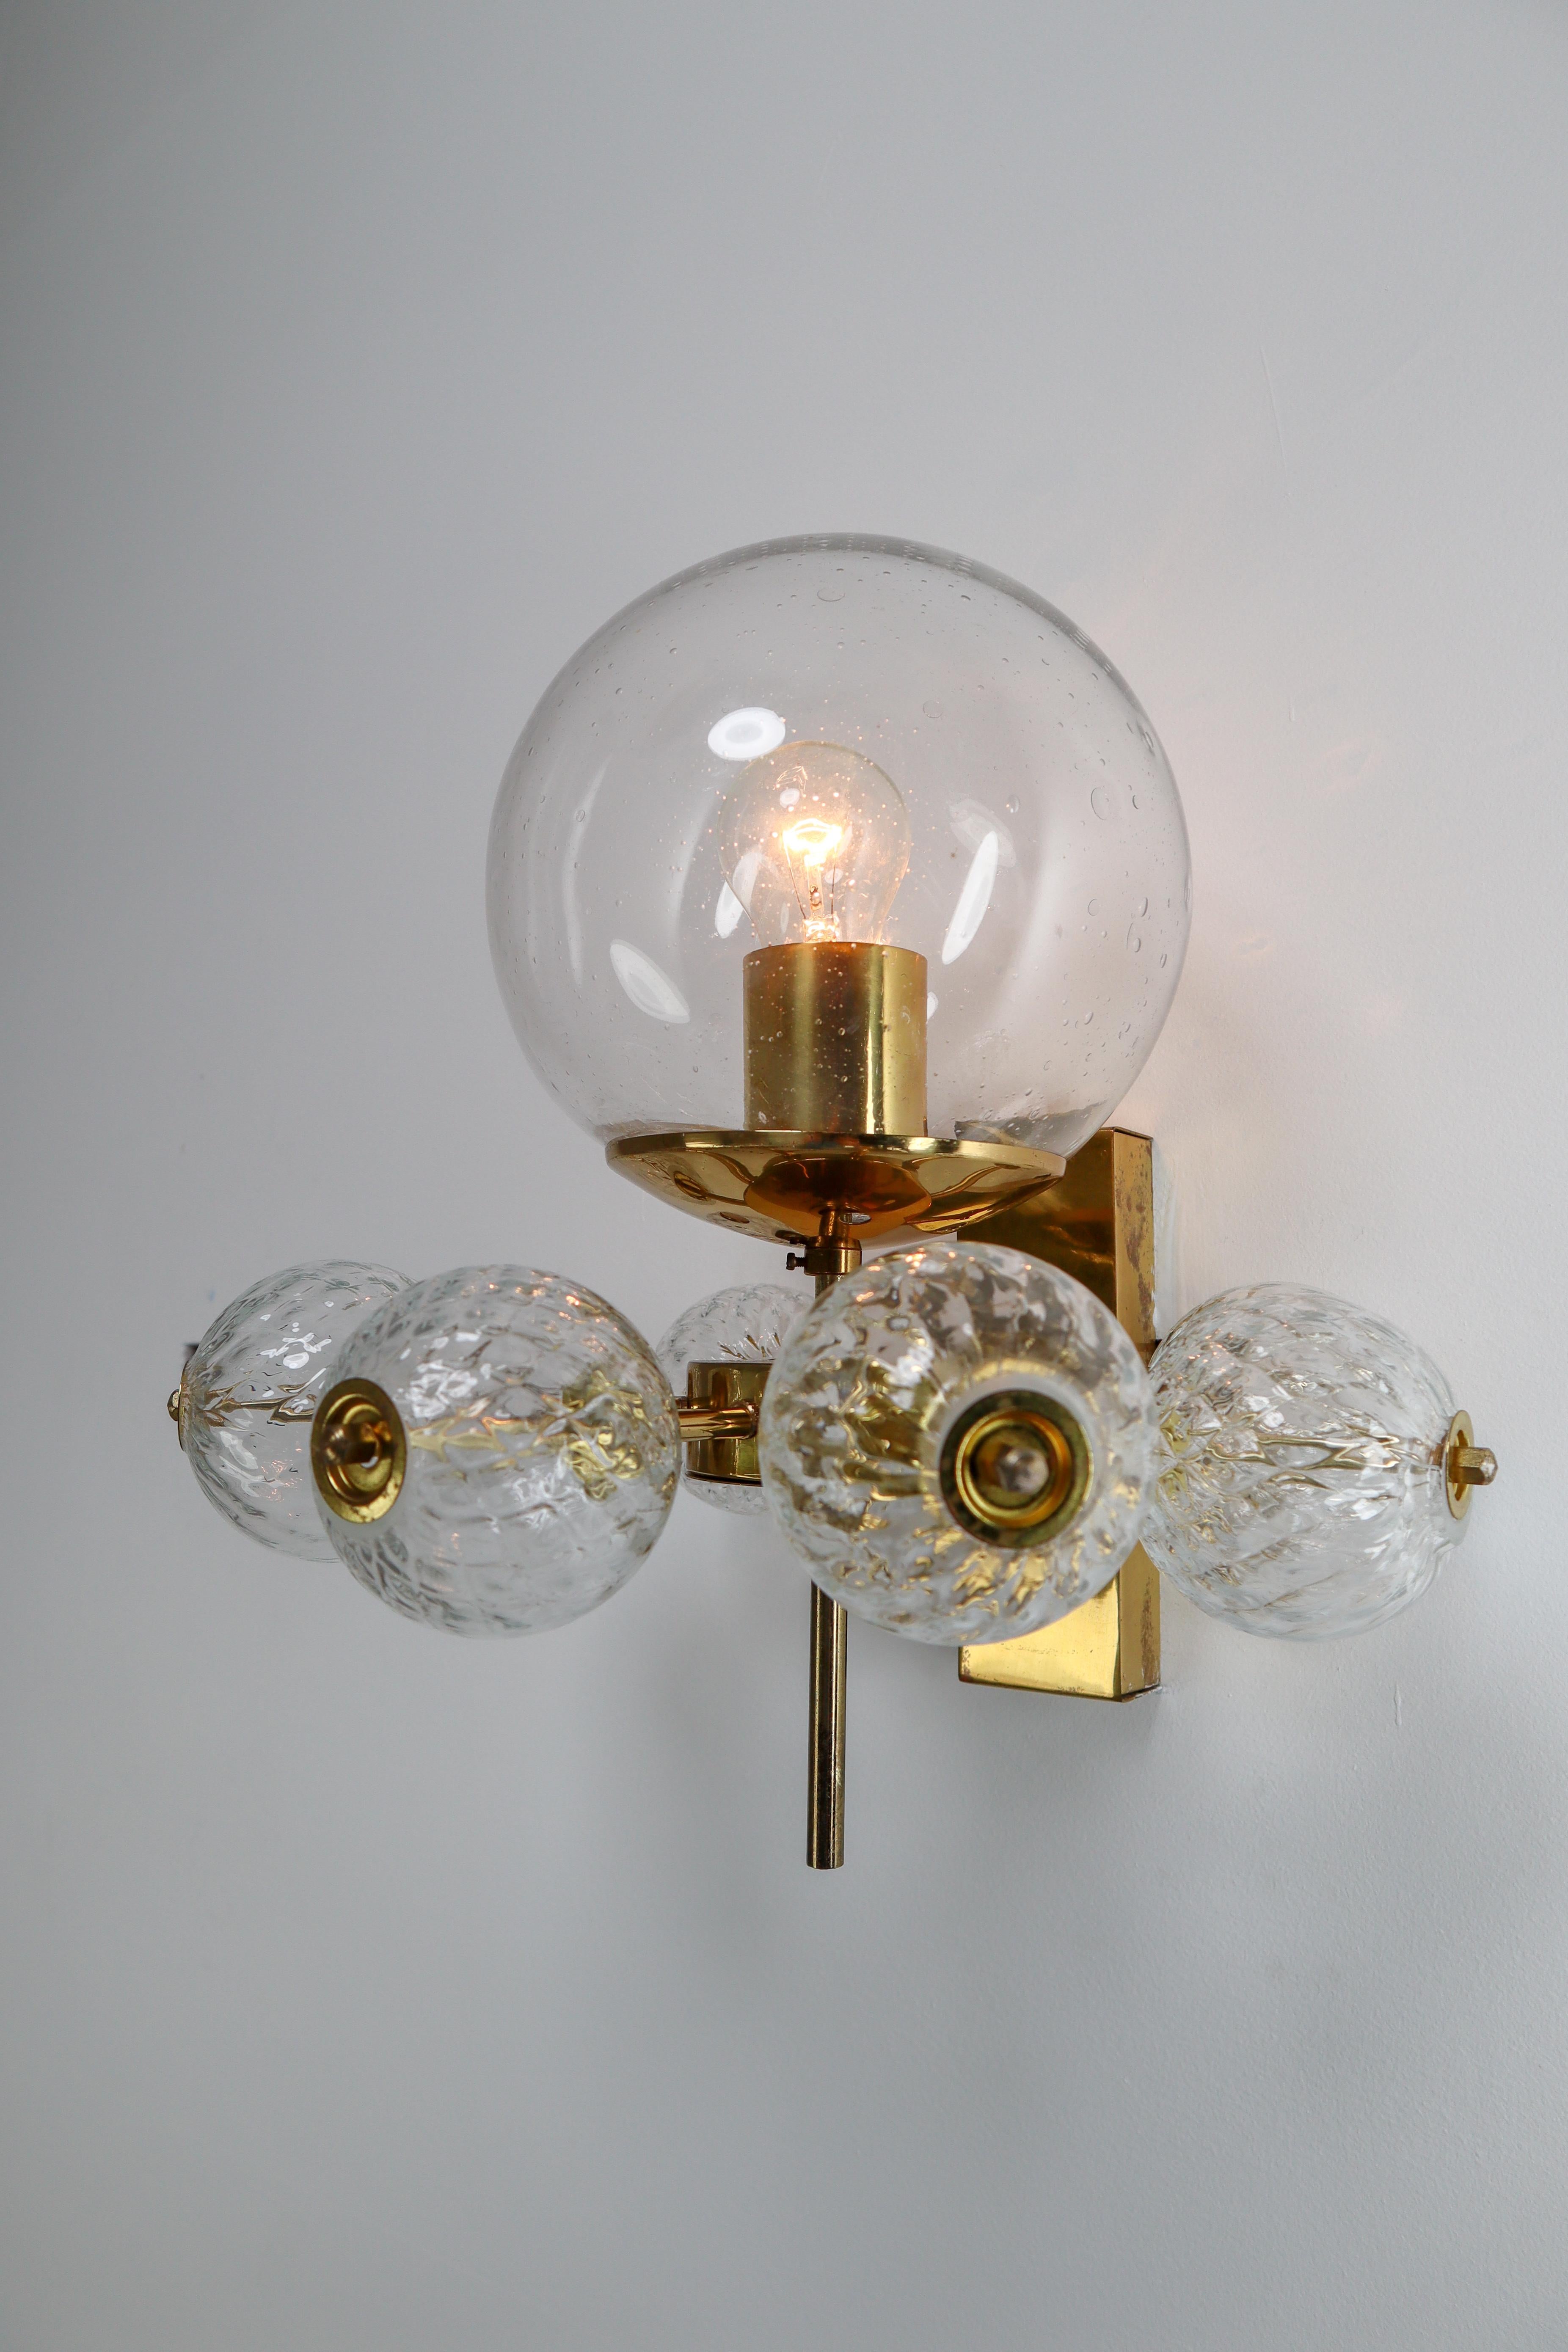 20th Century Hotel Wall Chandeliers with Brass Fixture, European, 1970s For Sale